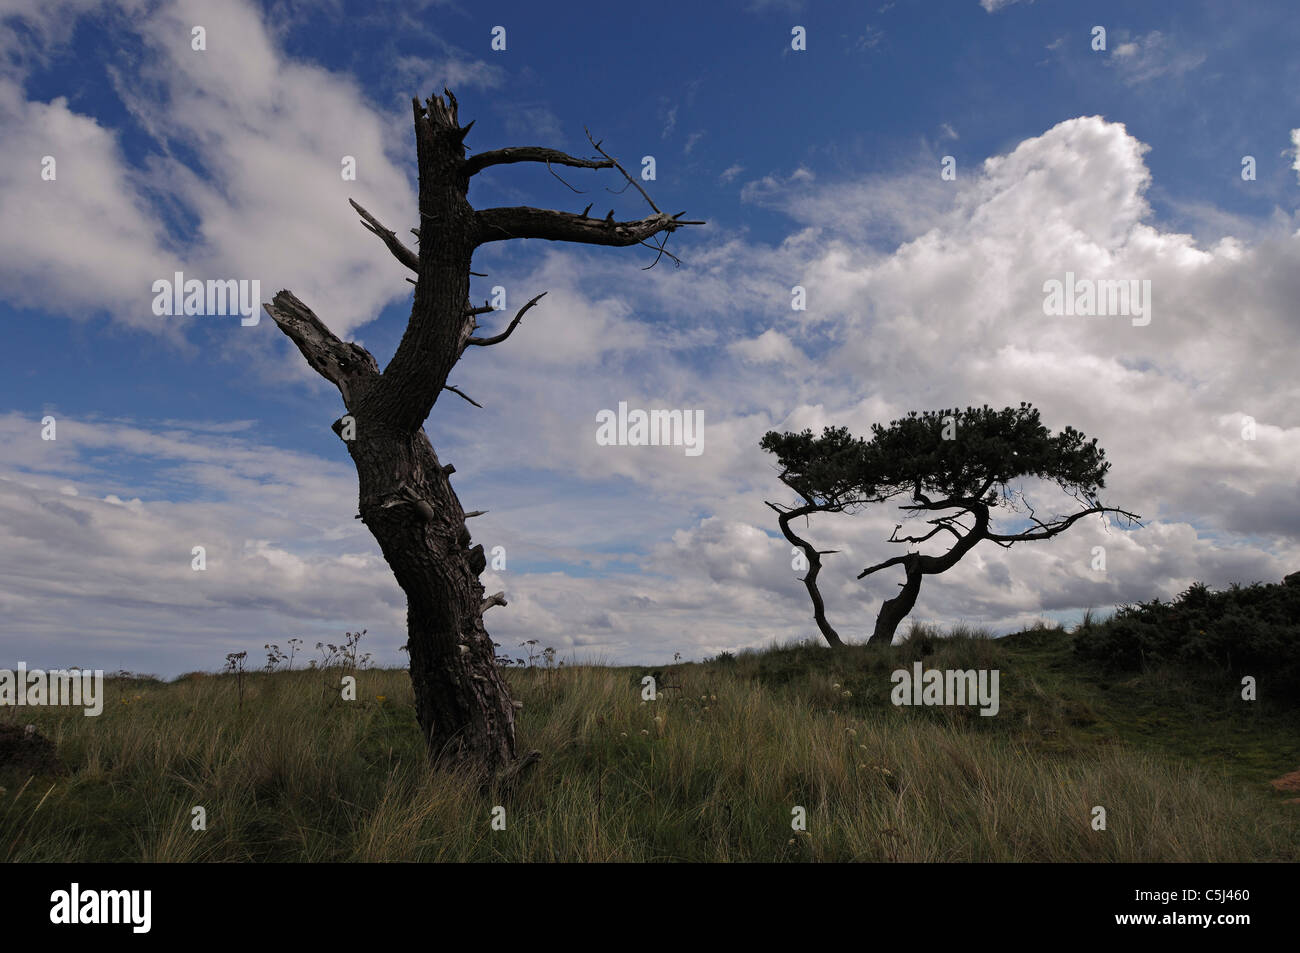 Stunted Scots pines in an open savannah-type of landscape under a summer sky, near Golspie, Sutherland, n.e. Scotland. Stock Photo